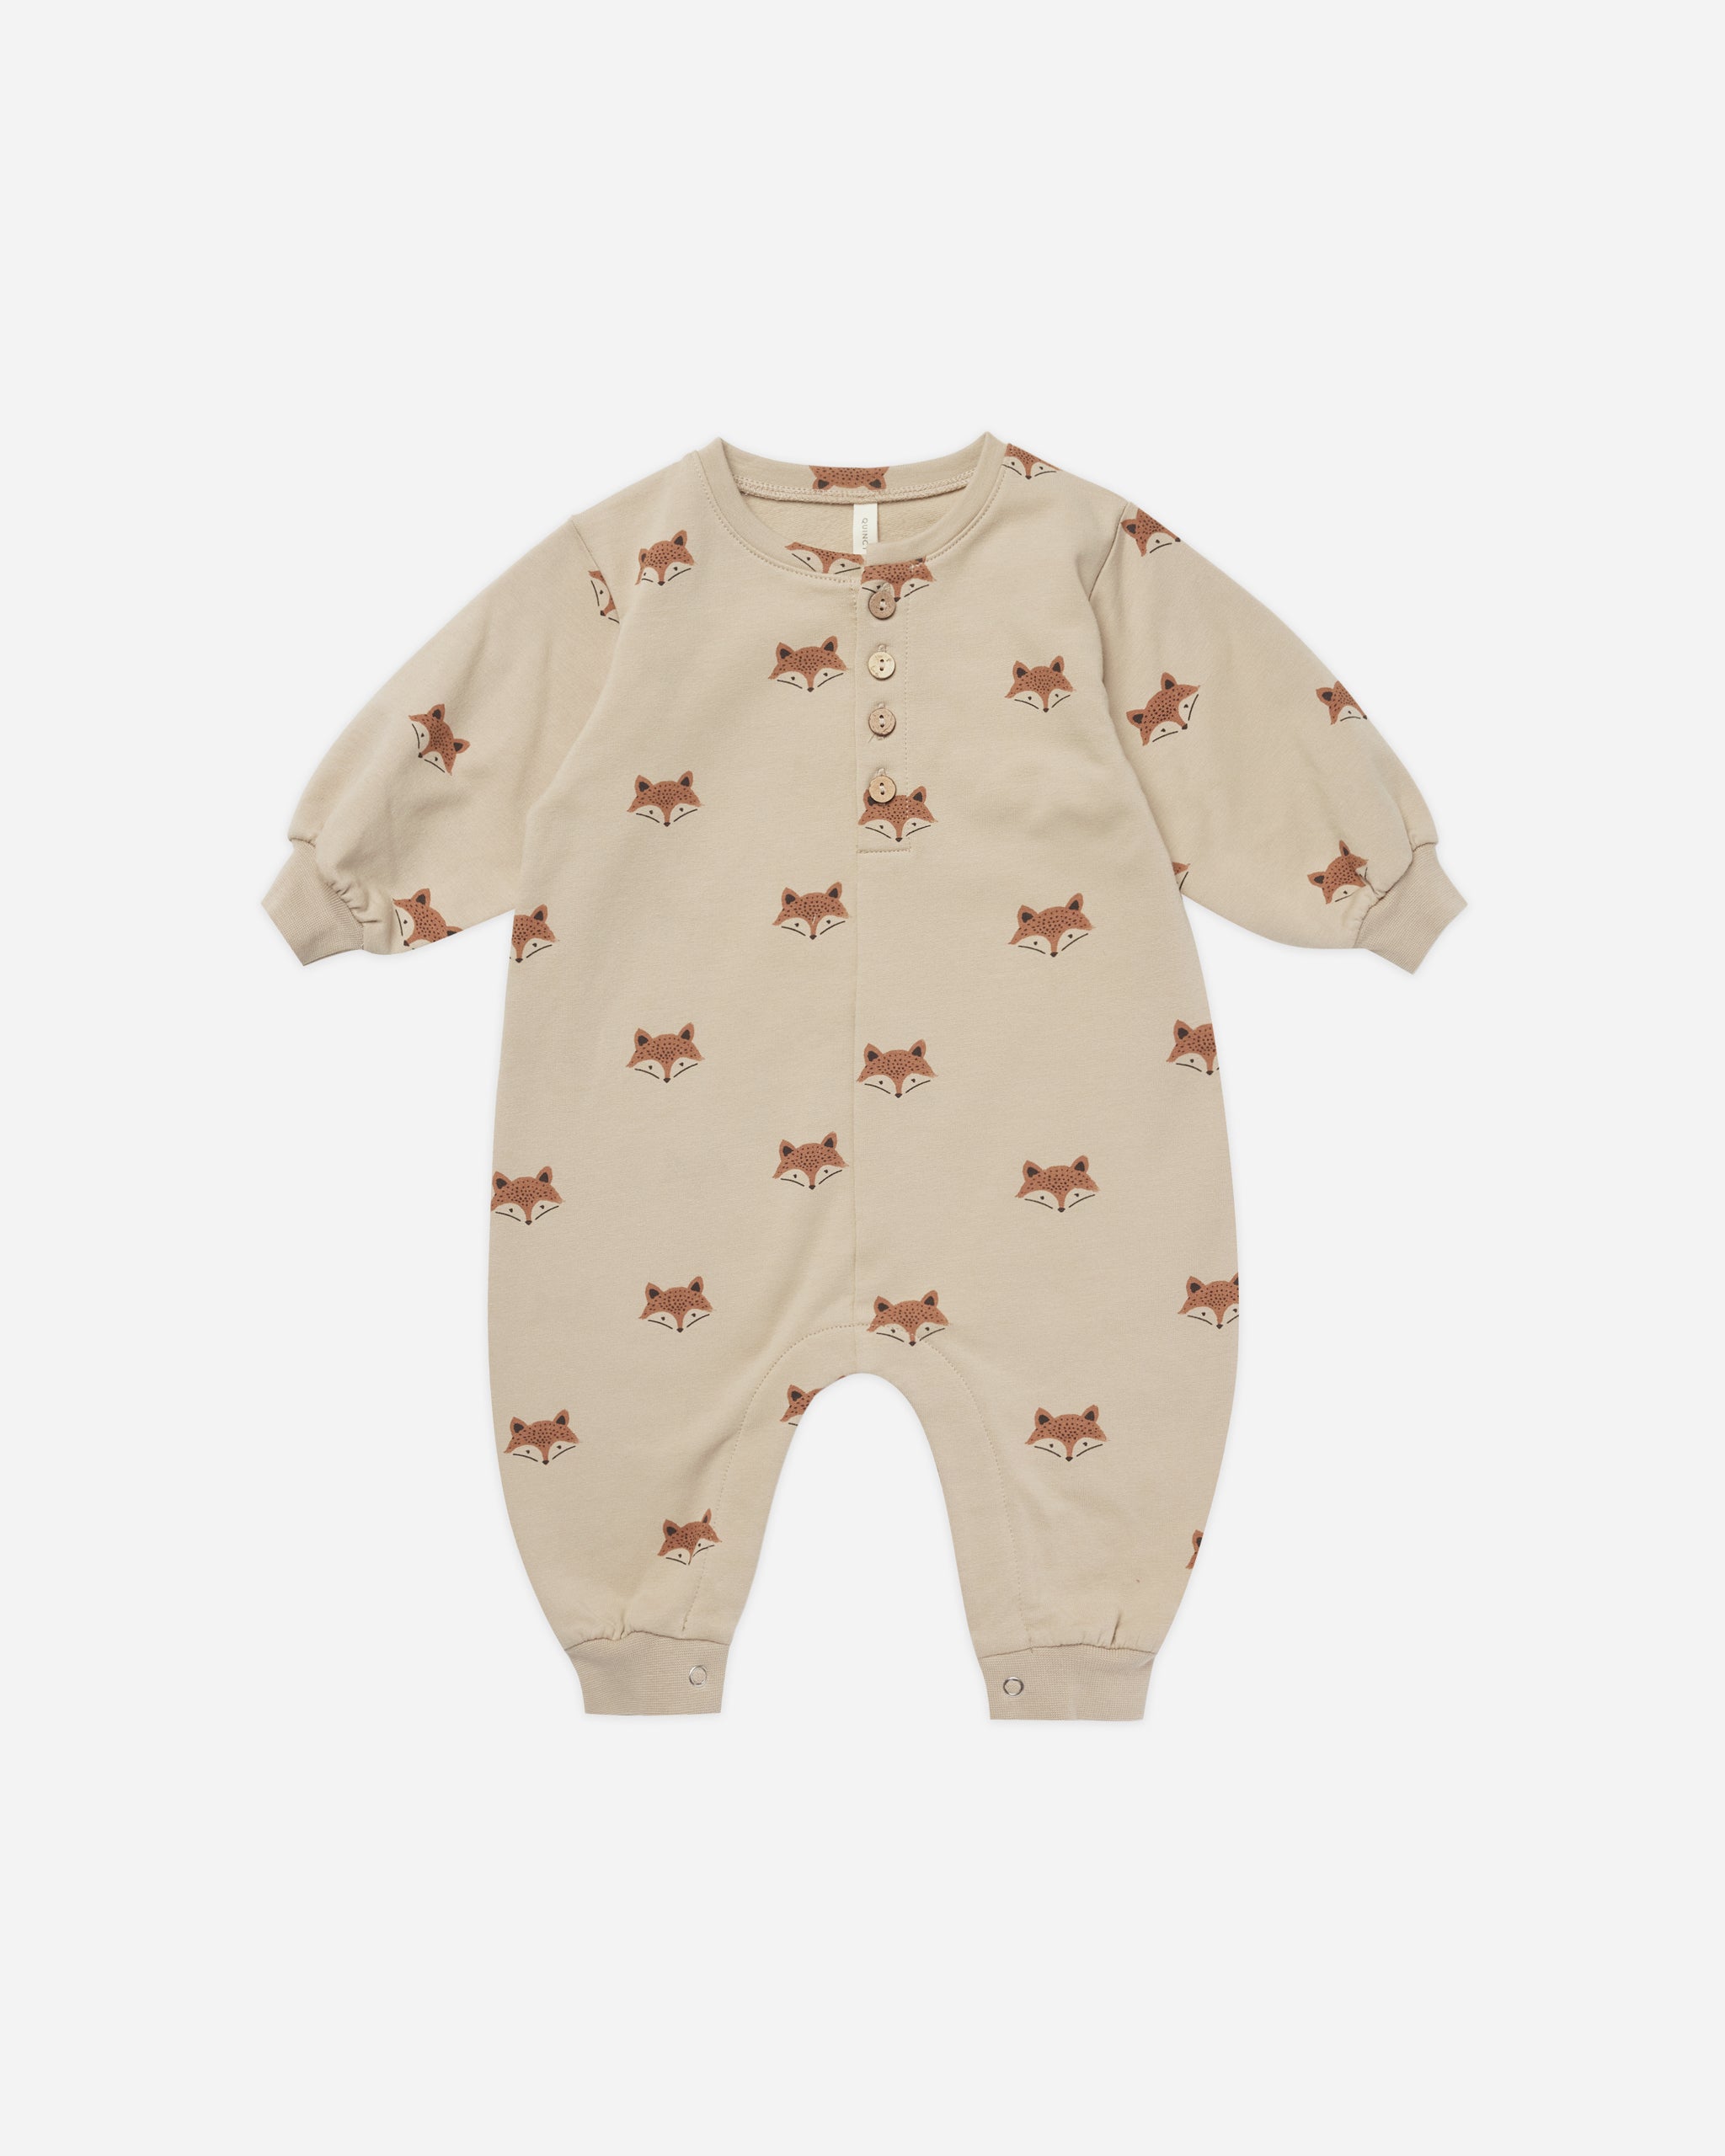 Relaxed Fleece Jumpsuit || Foxes - Rylee + Cru | Kids Clothes | Trendy Baby Clothes | Modern Infant Outfits |